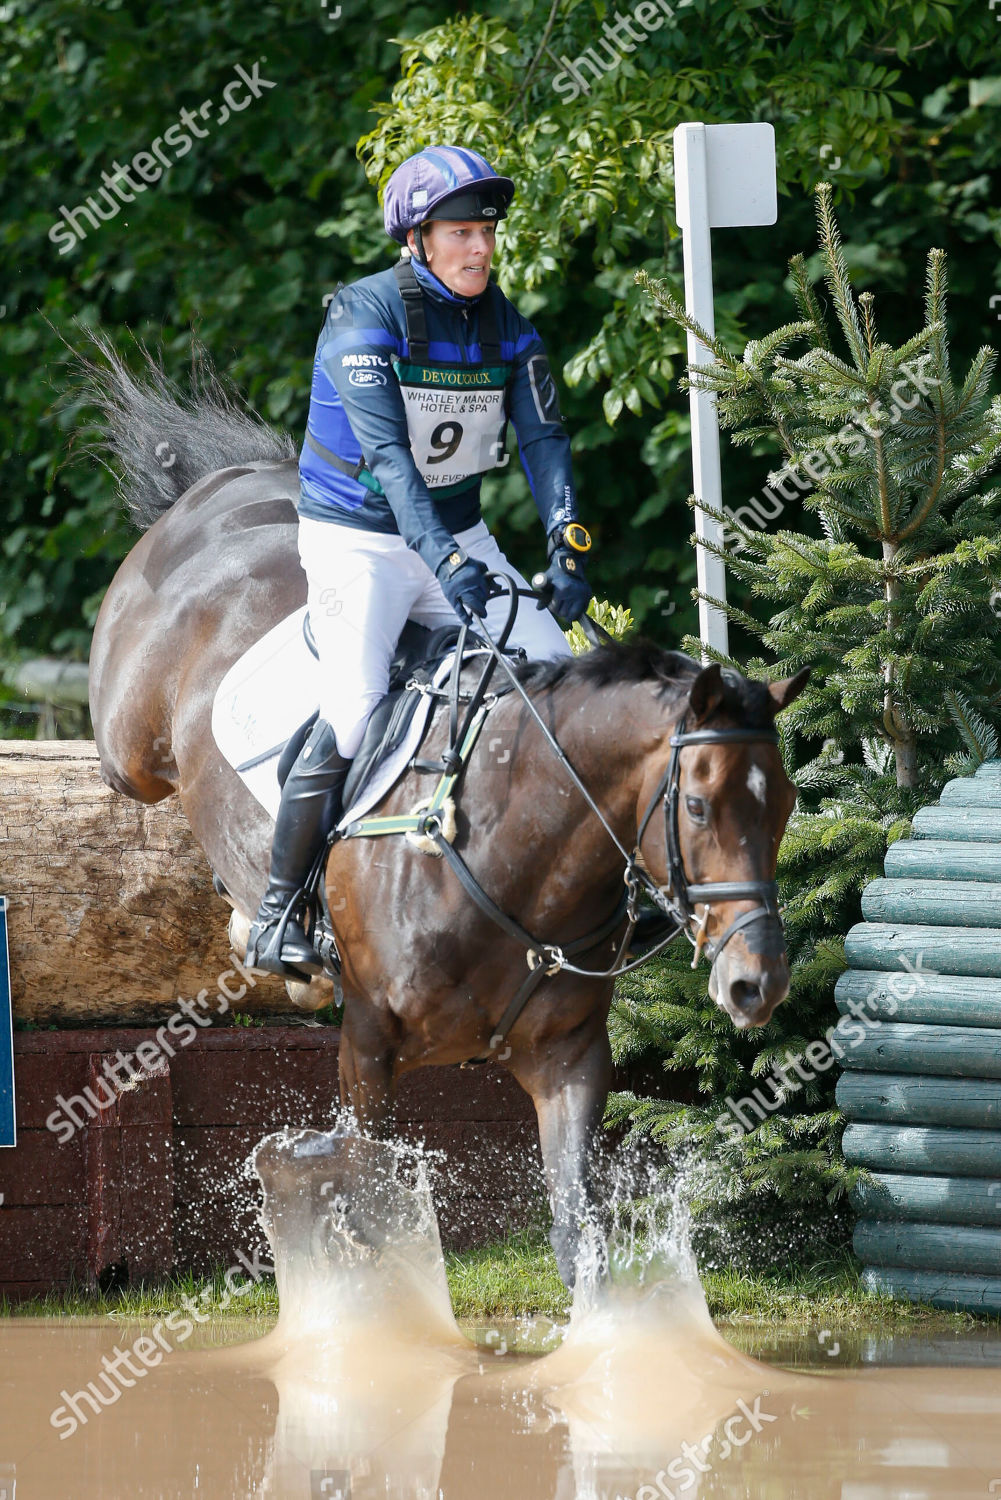 the-whatley-manor-horse-trials-gatcombe-park-gloucestershire-uk-shutterstock-editorial-10414494t.jpg